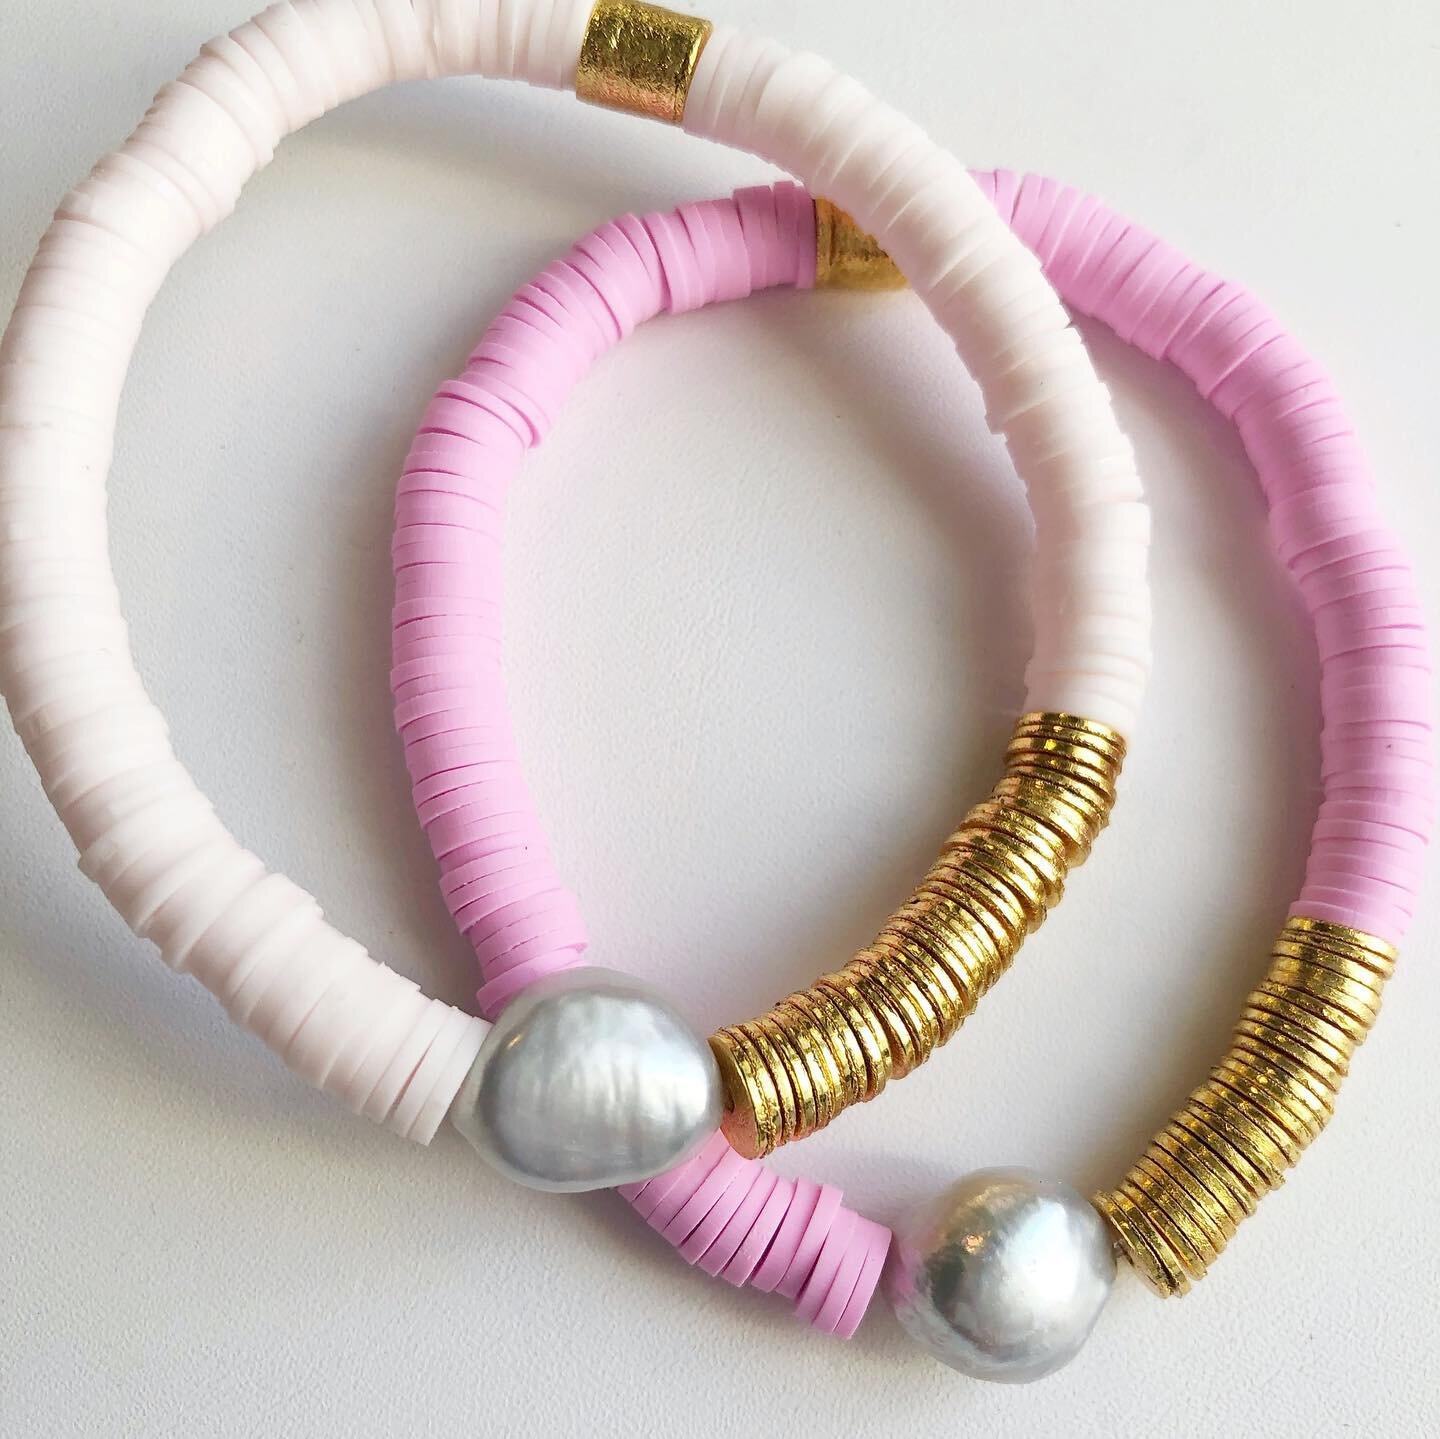 Freshwater pearl bracelets! One of each color available tonight. $30 each. To purchase, comment sold with item color (light pink or pink).